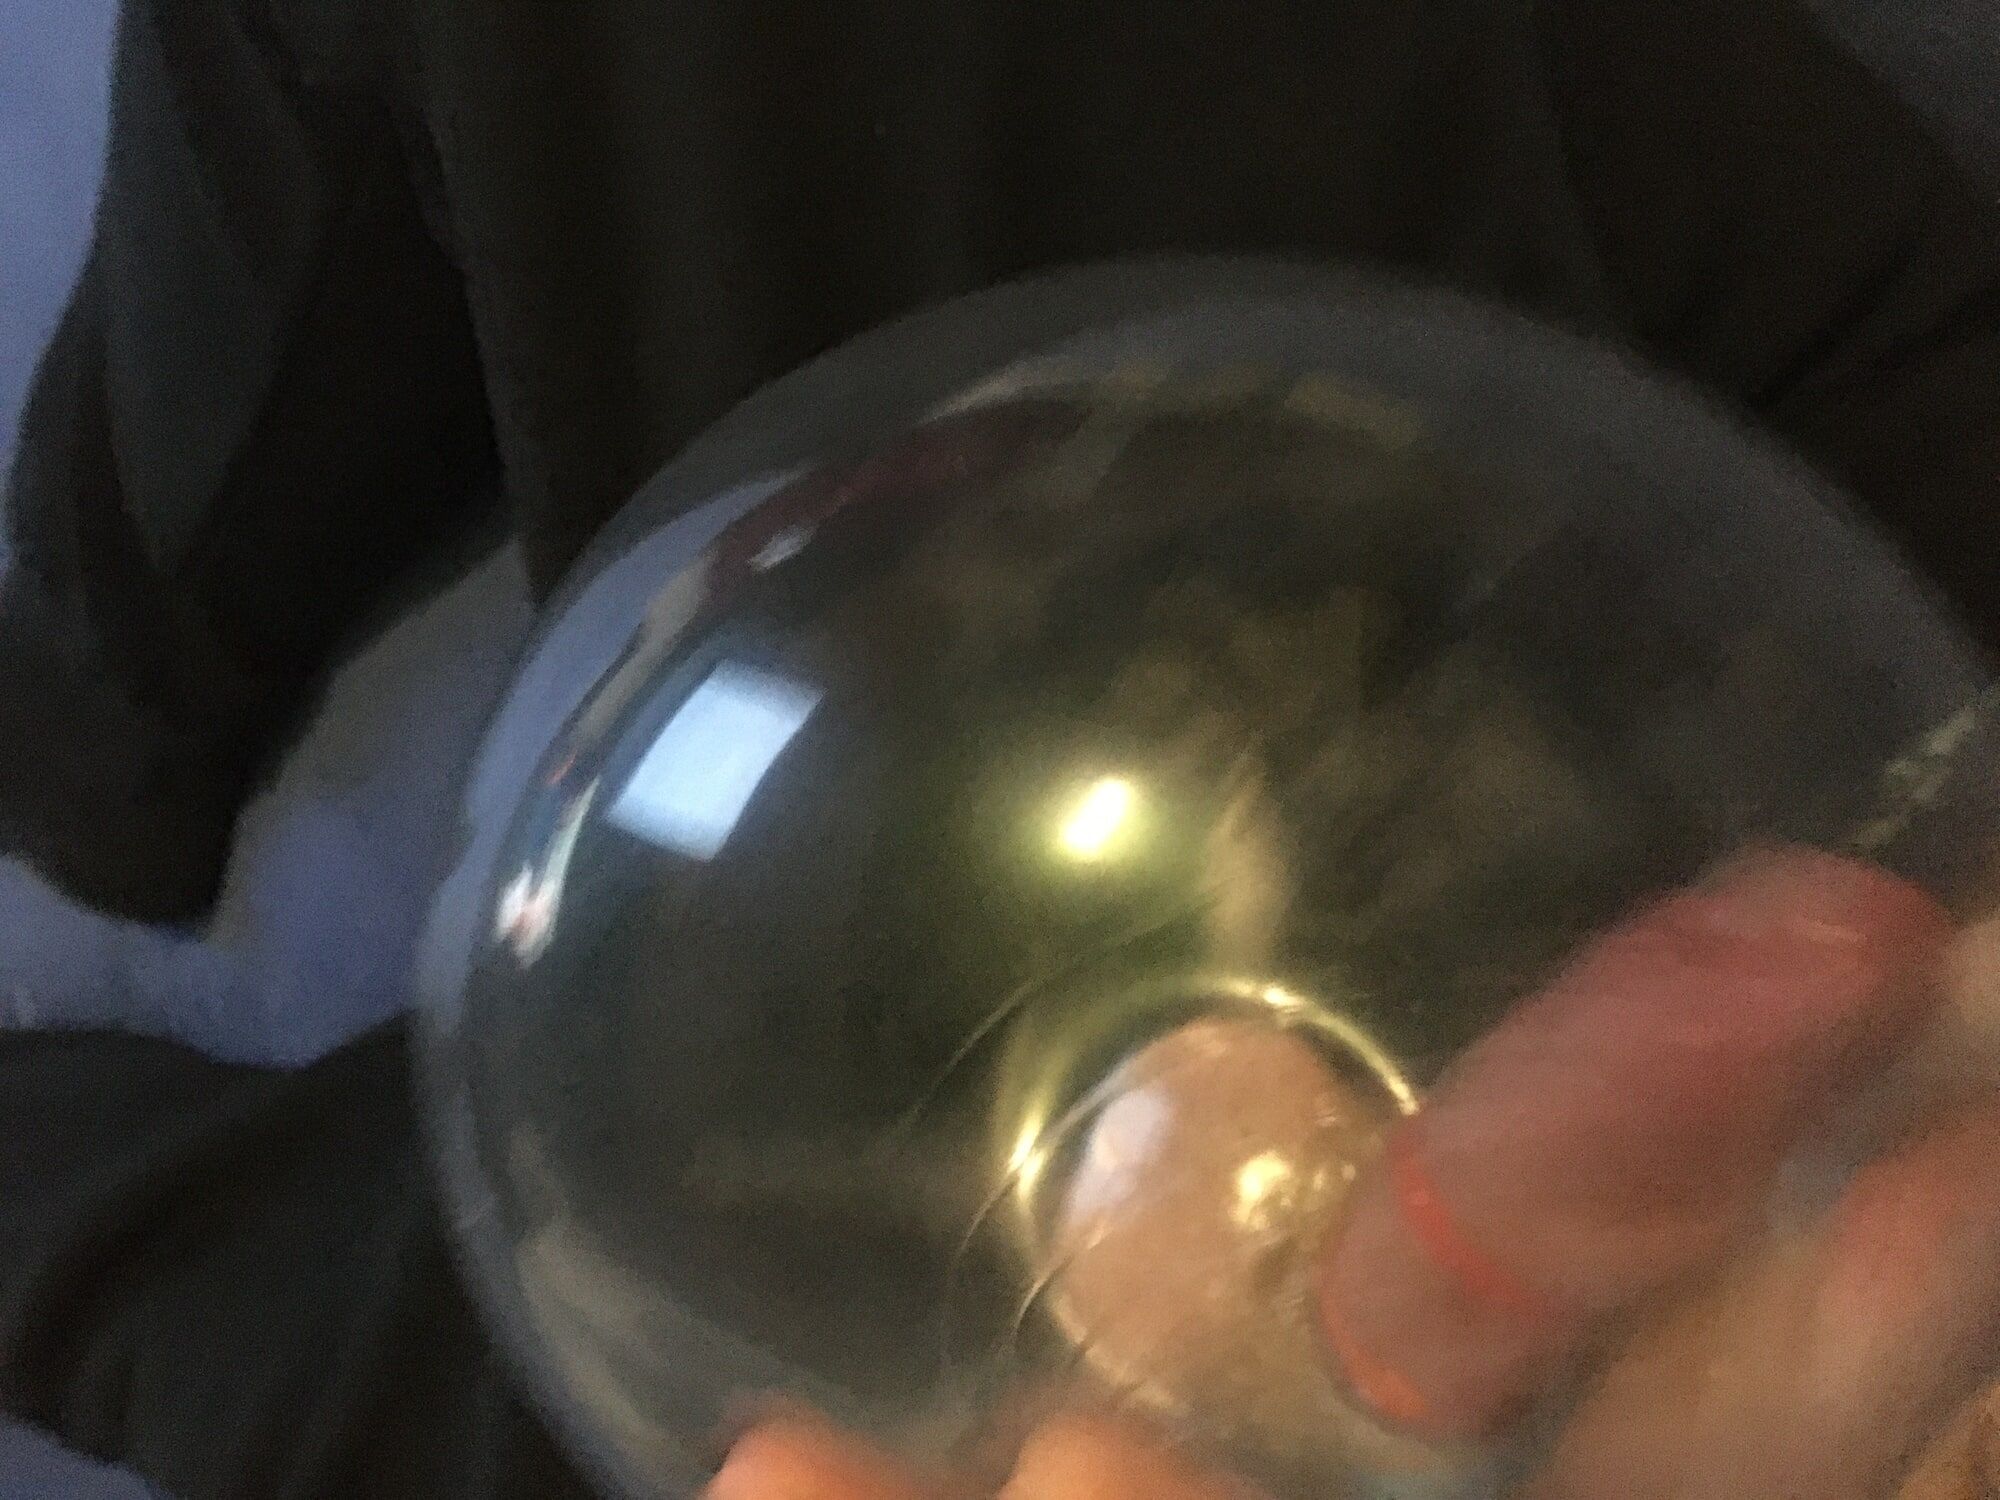  Haired Dick And Balls With Rubber Bands Condom Ballon  fuck #5